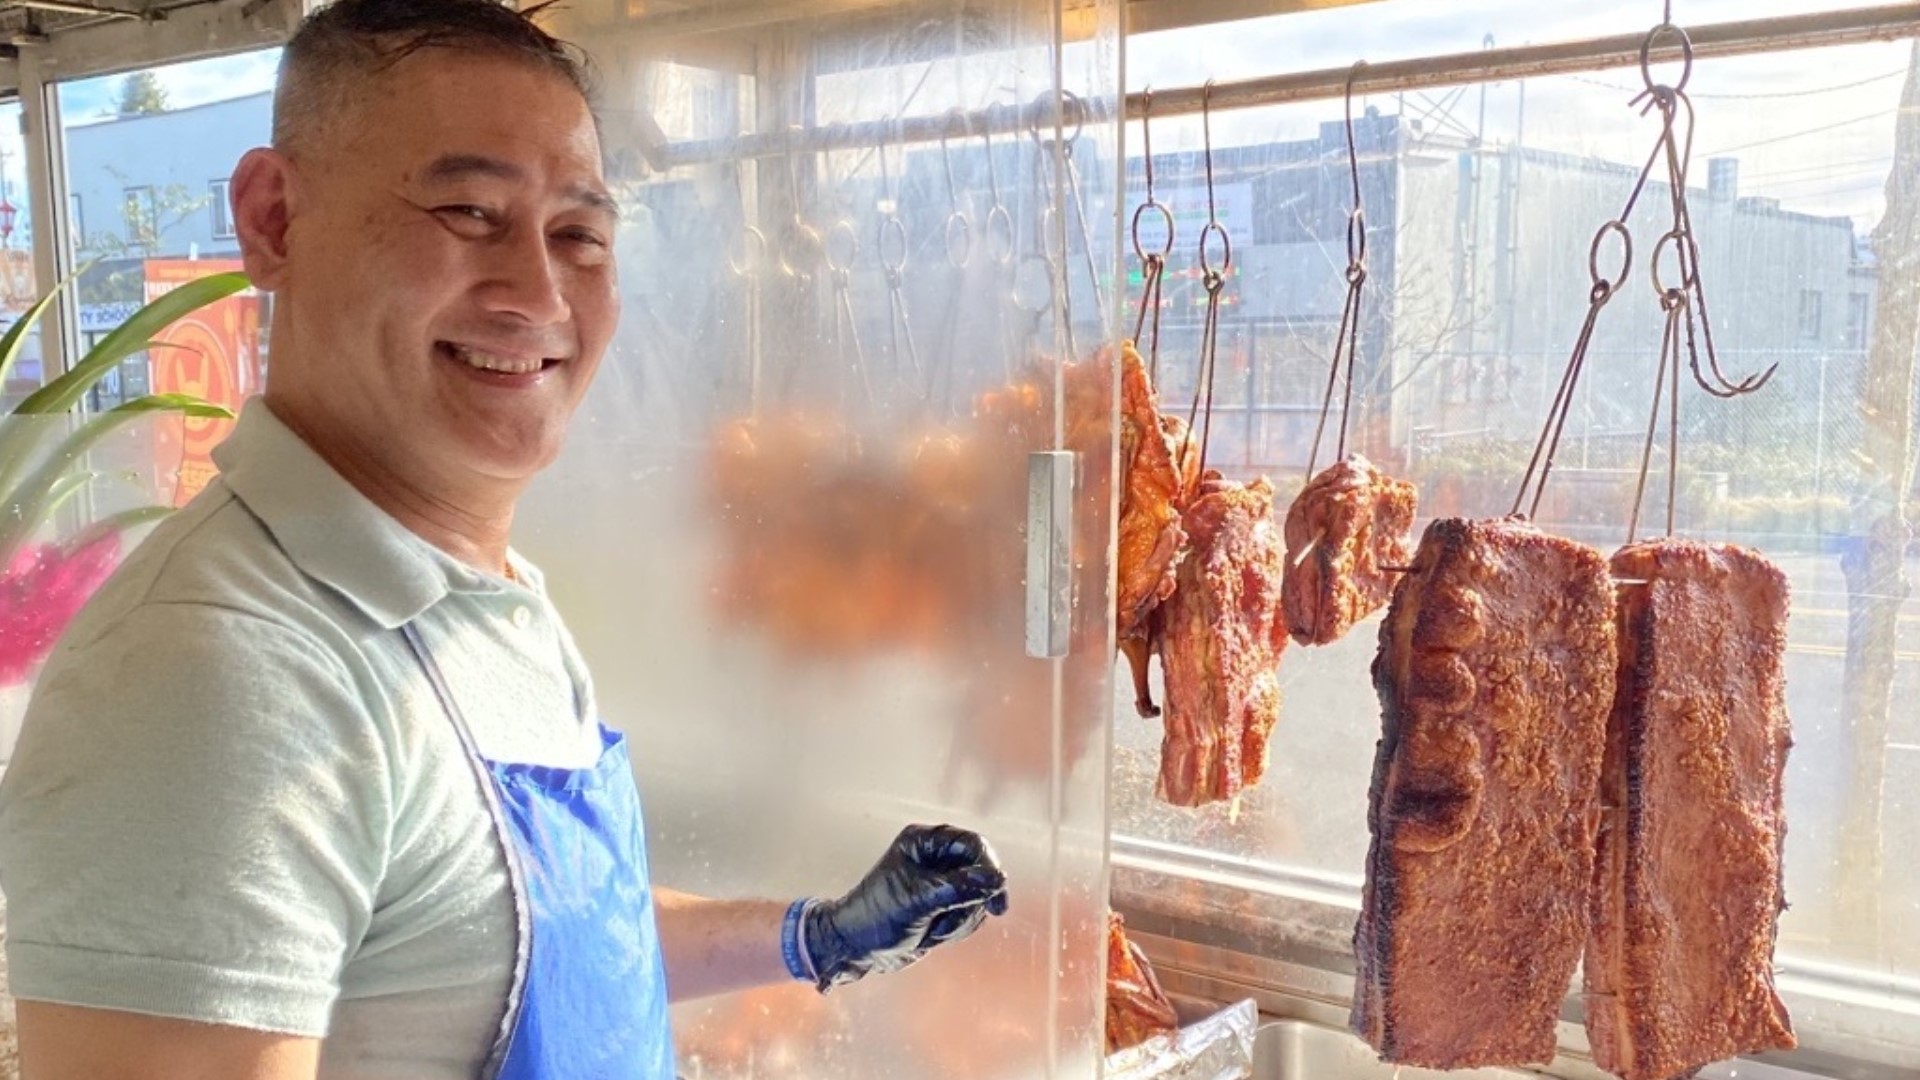 Tho Tuong BBQ has a cult following after nearly 27 years in business. #k5evening